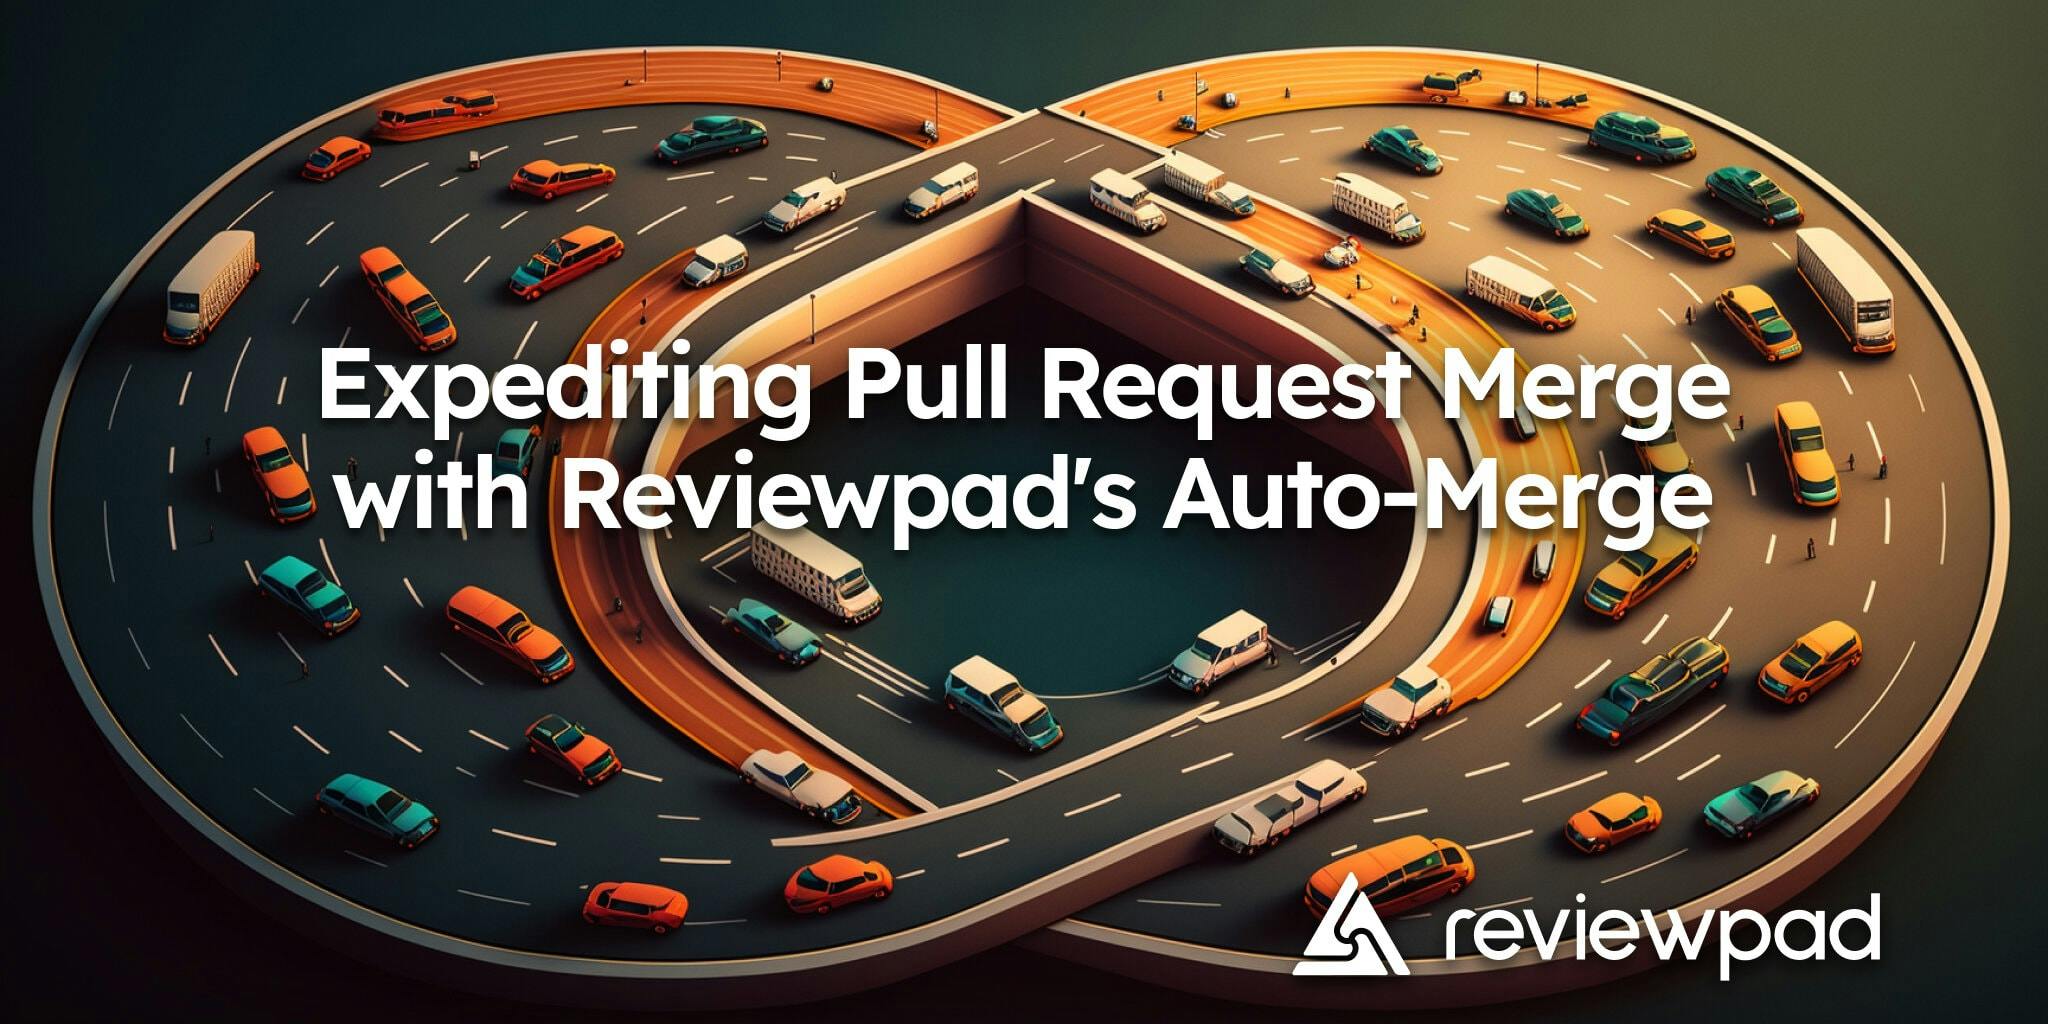 Expediting Pull Request Merge with Reviewpad's Auto-Merge